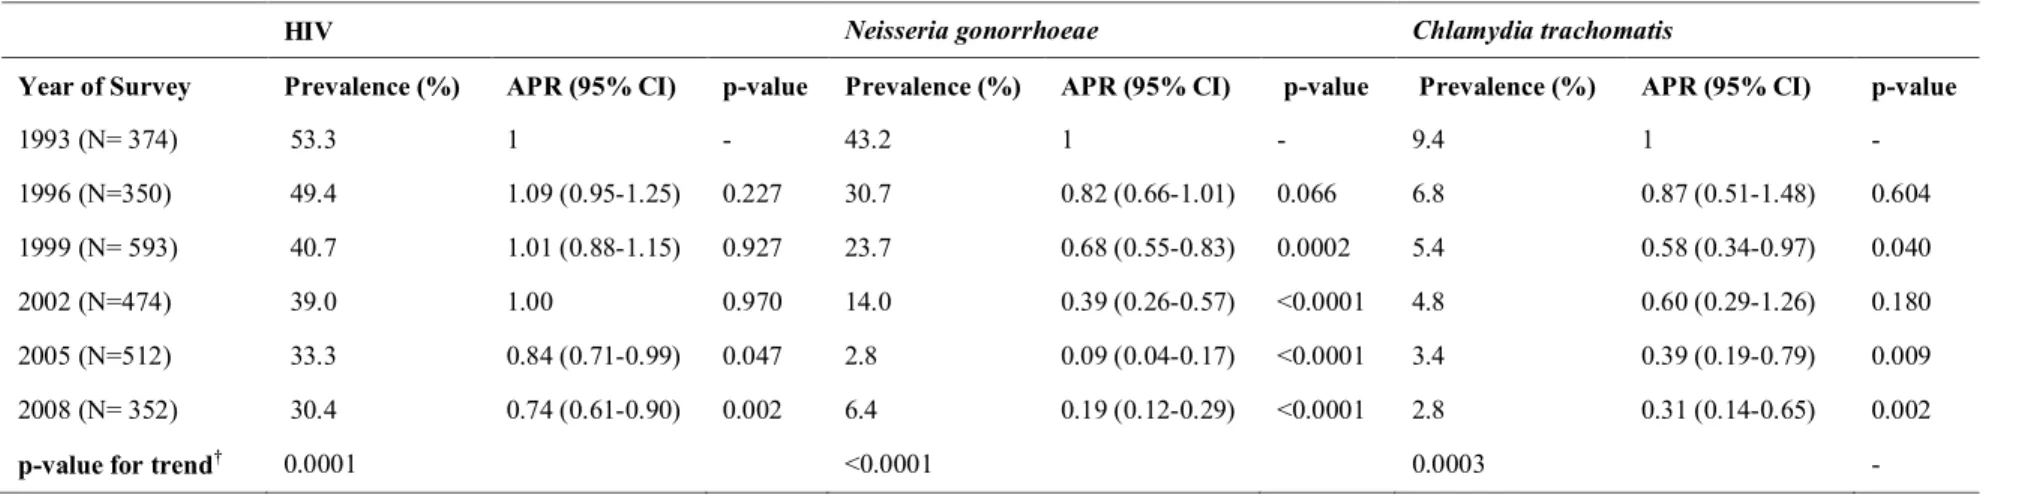 Table  2:  Multivariate  log-binomial  regression  model  for  time  trend  analysis  of  HIV  and  sexually  transmitted  infections  prevalence  among female sex workers, Benin, 1993 – 2008 